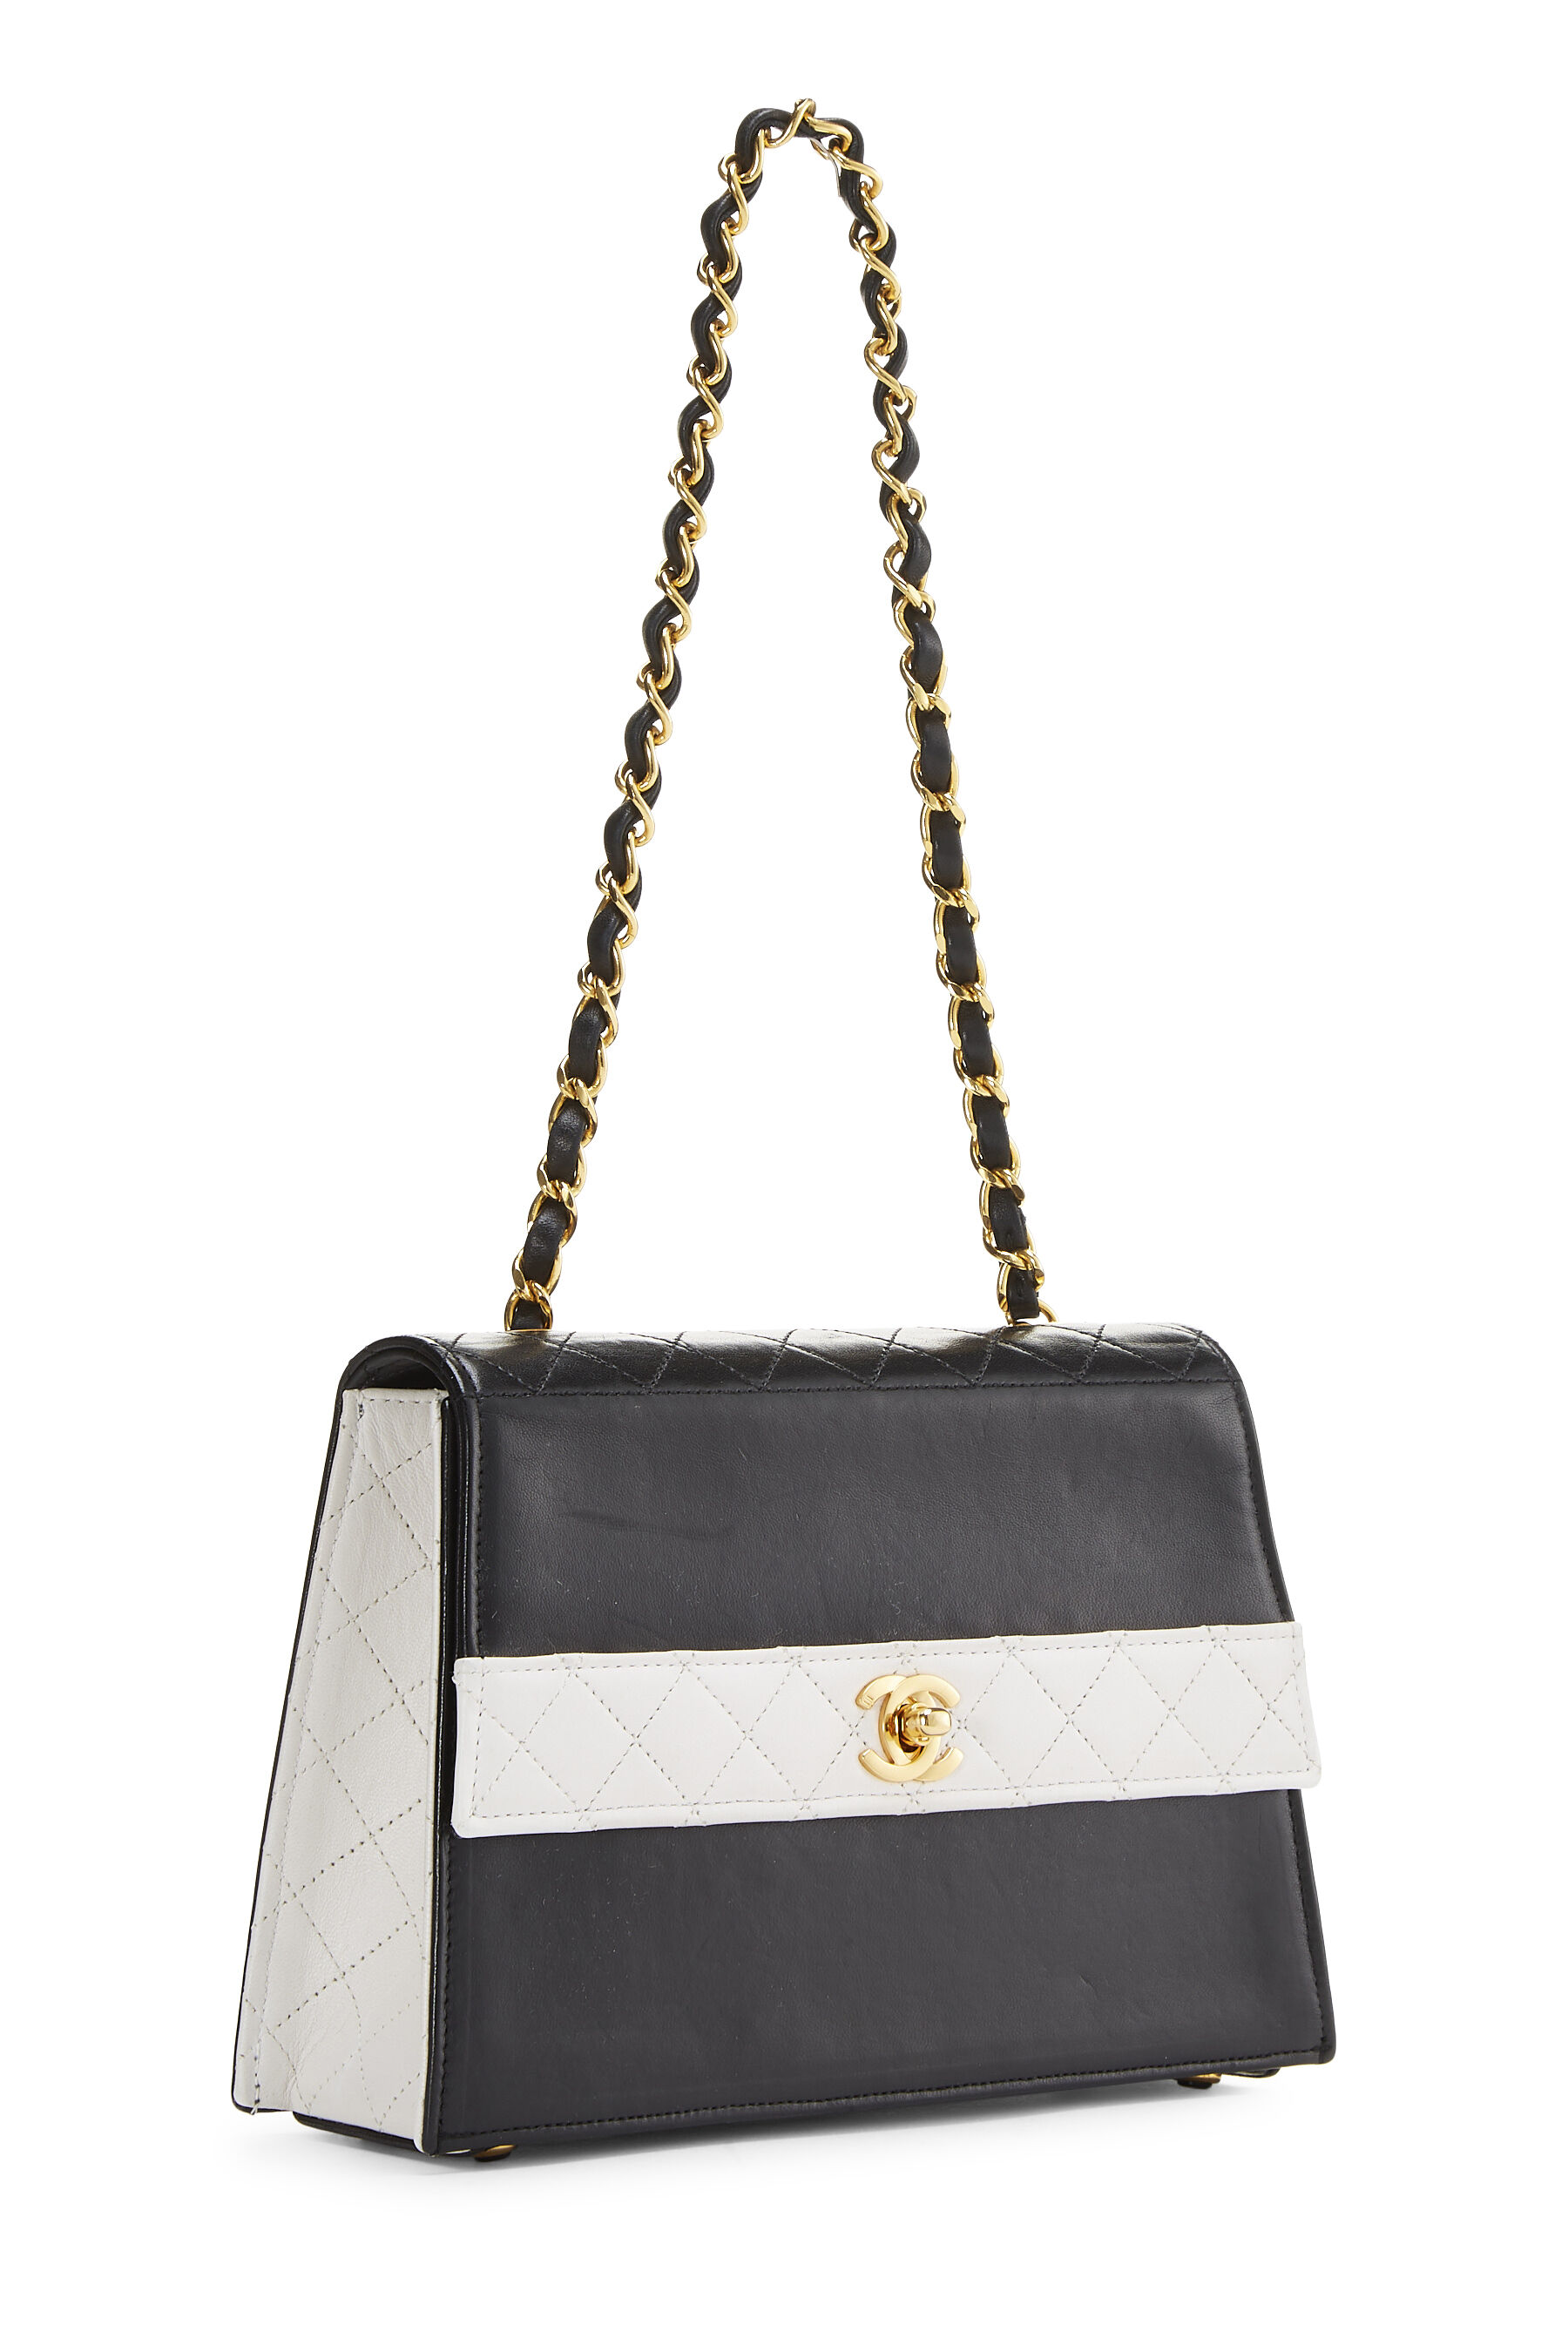 Chanel White & Black Quilted Lambskin Trapezoid Shoulder Mini